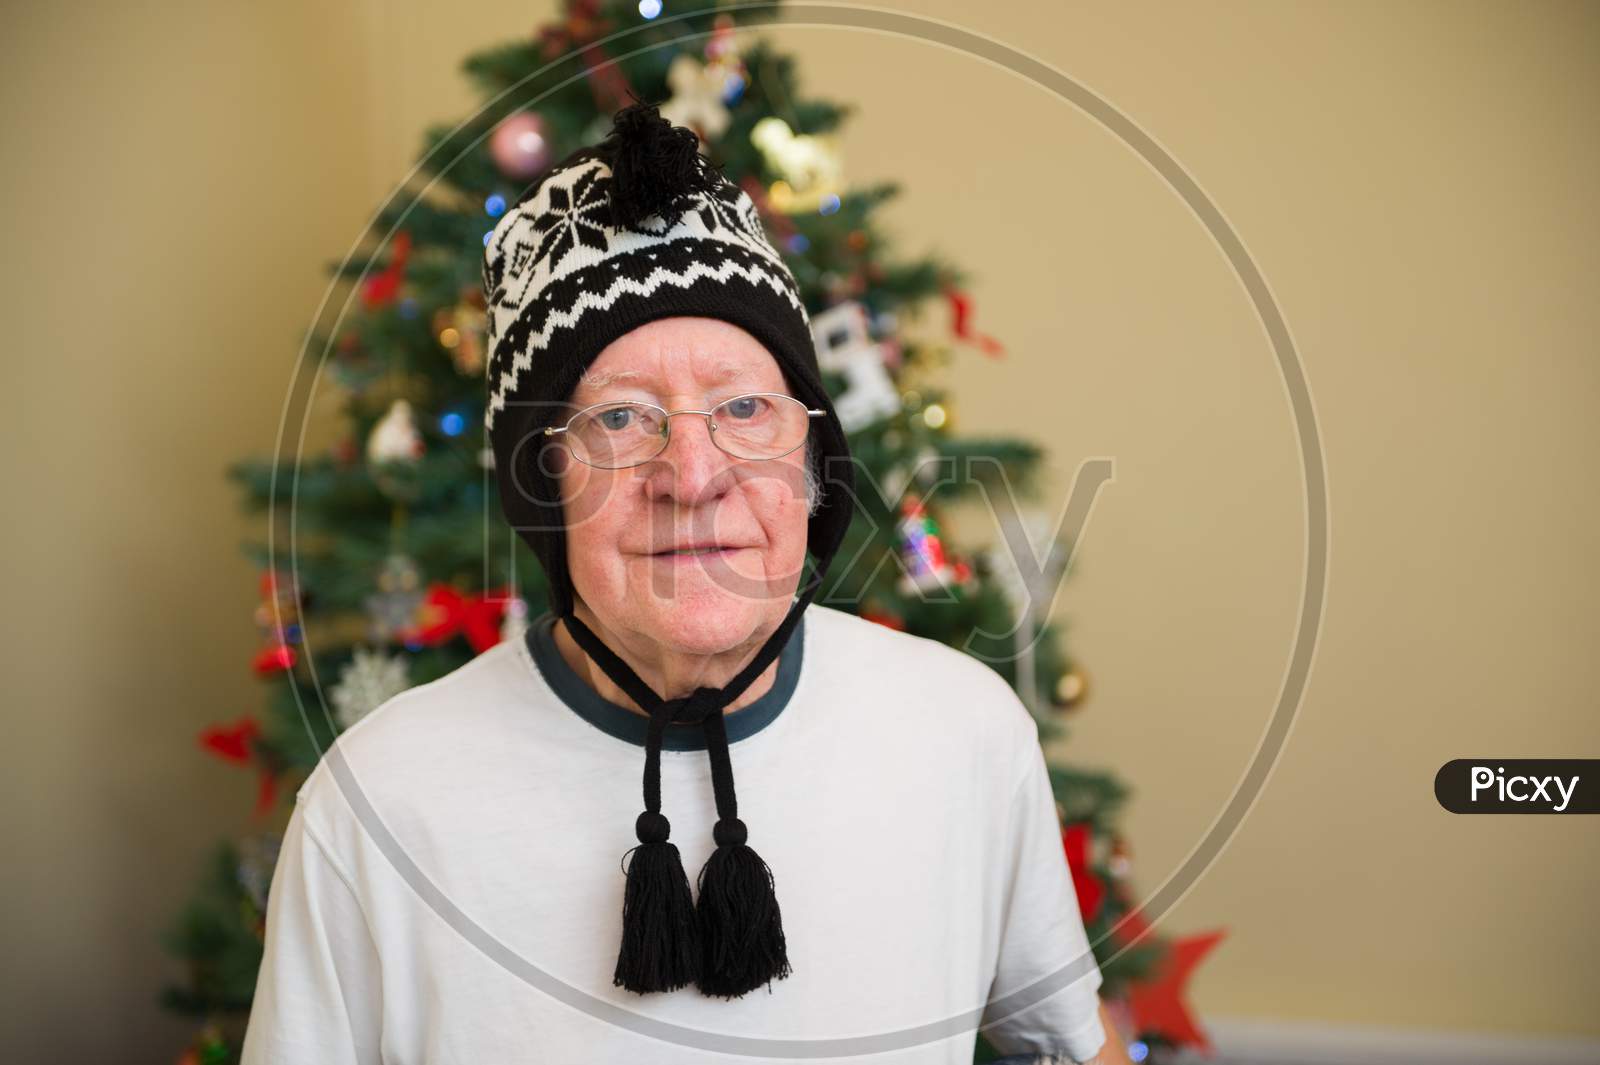 An Elderly Man Wearing A Christmas Hat In Front Of A Christmas Tree